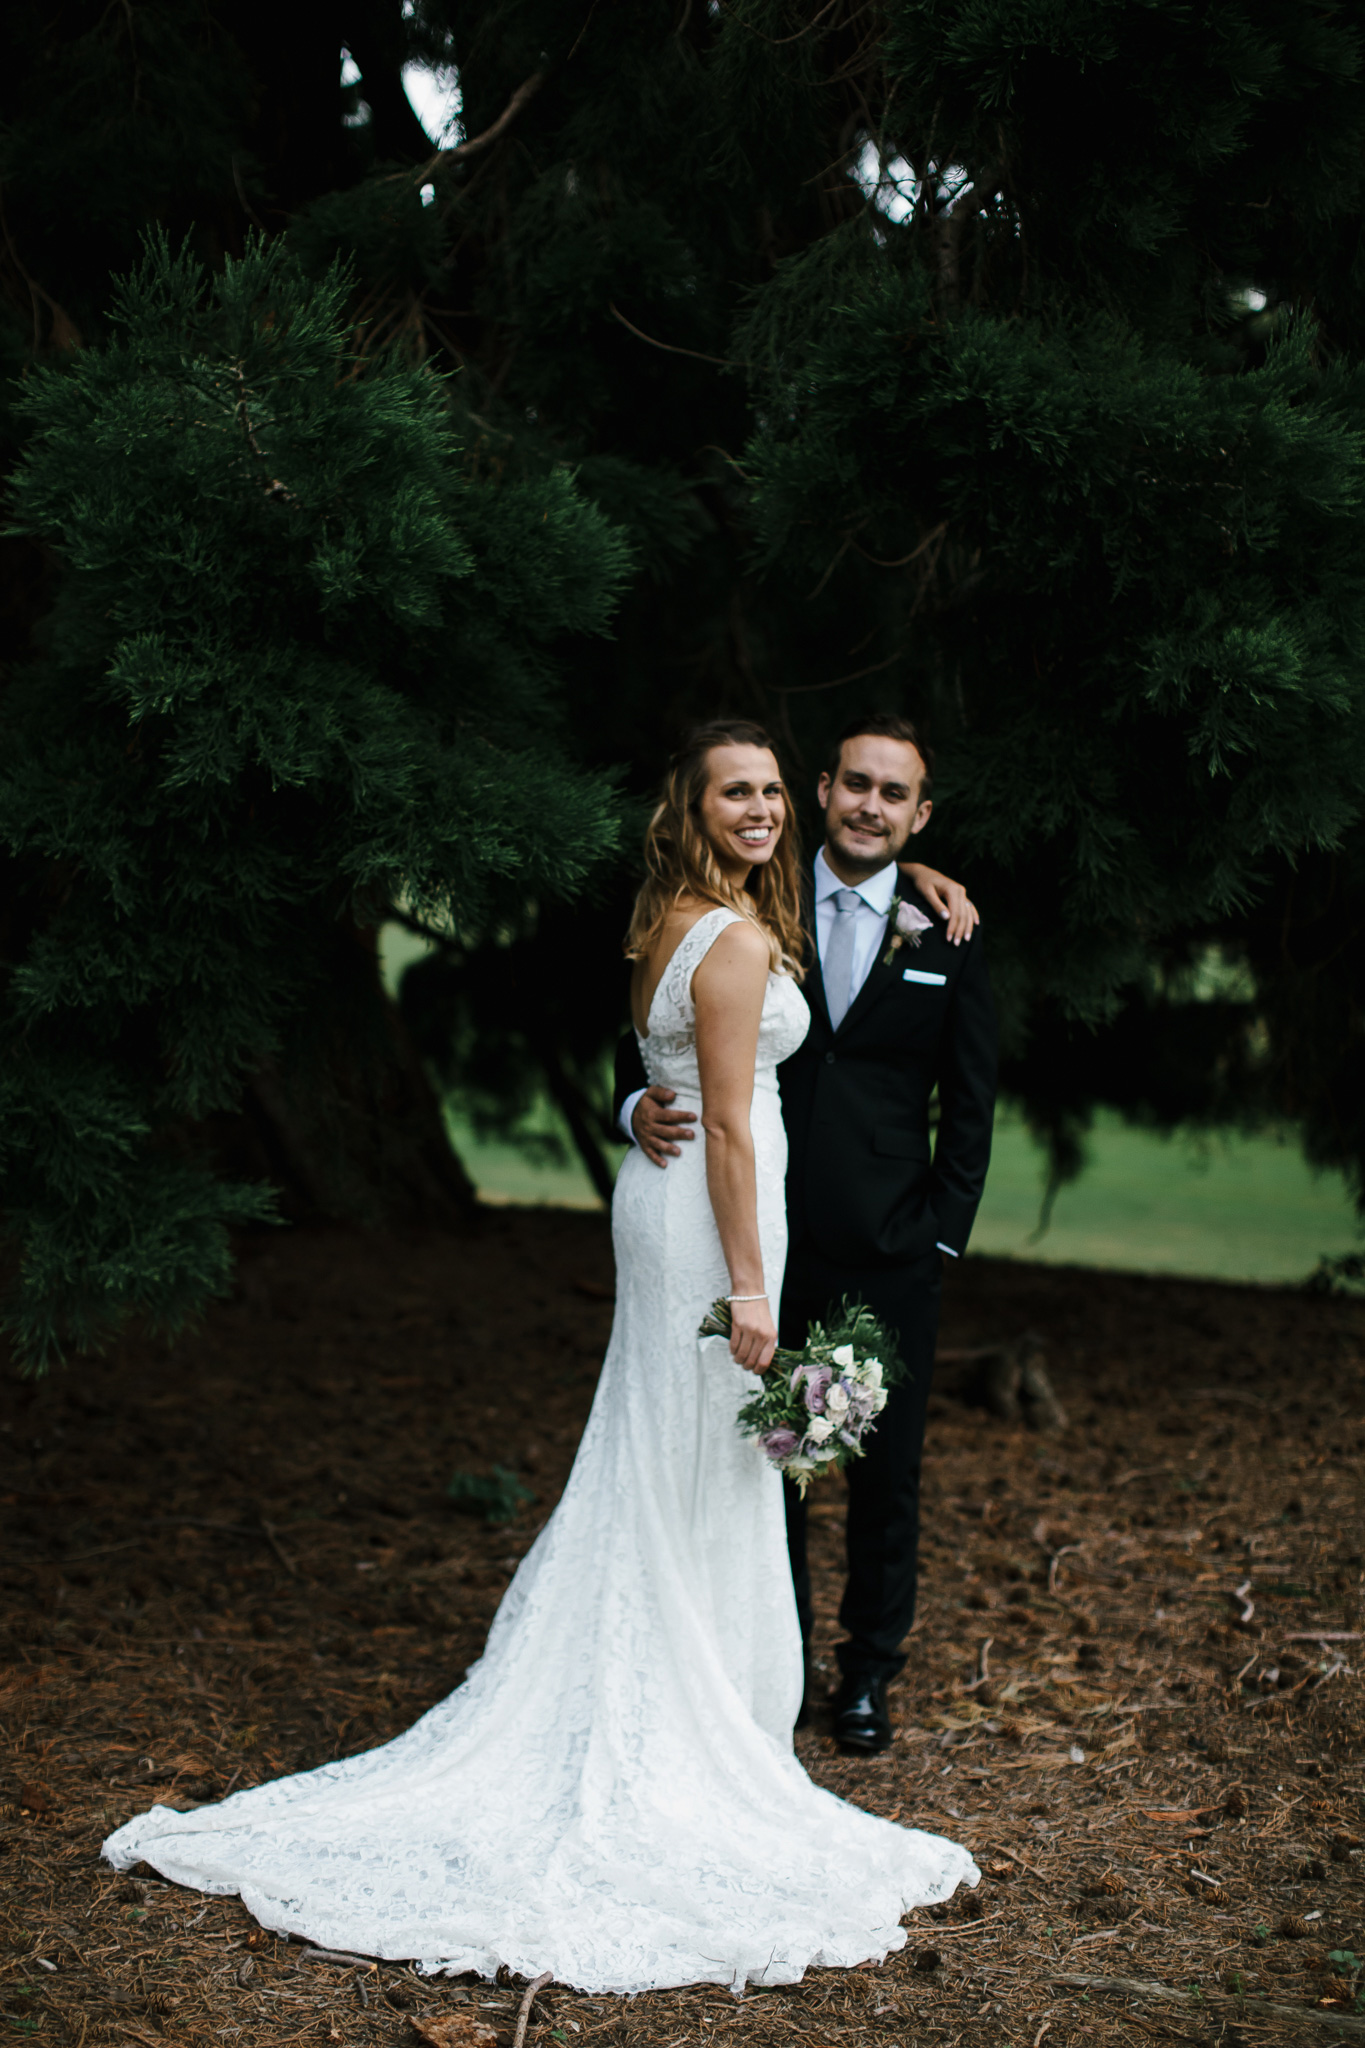 Sophie James Country Rustic Wedding Chris Barber Photography 041